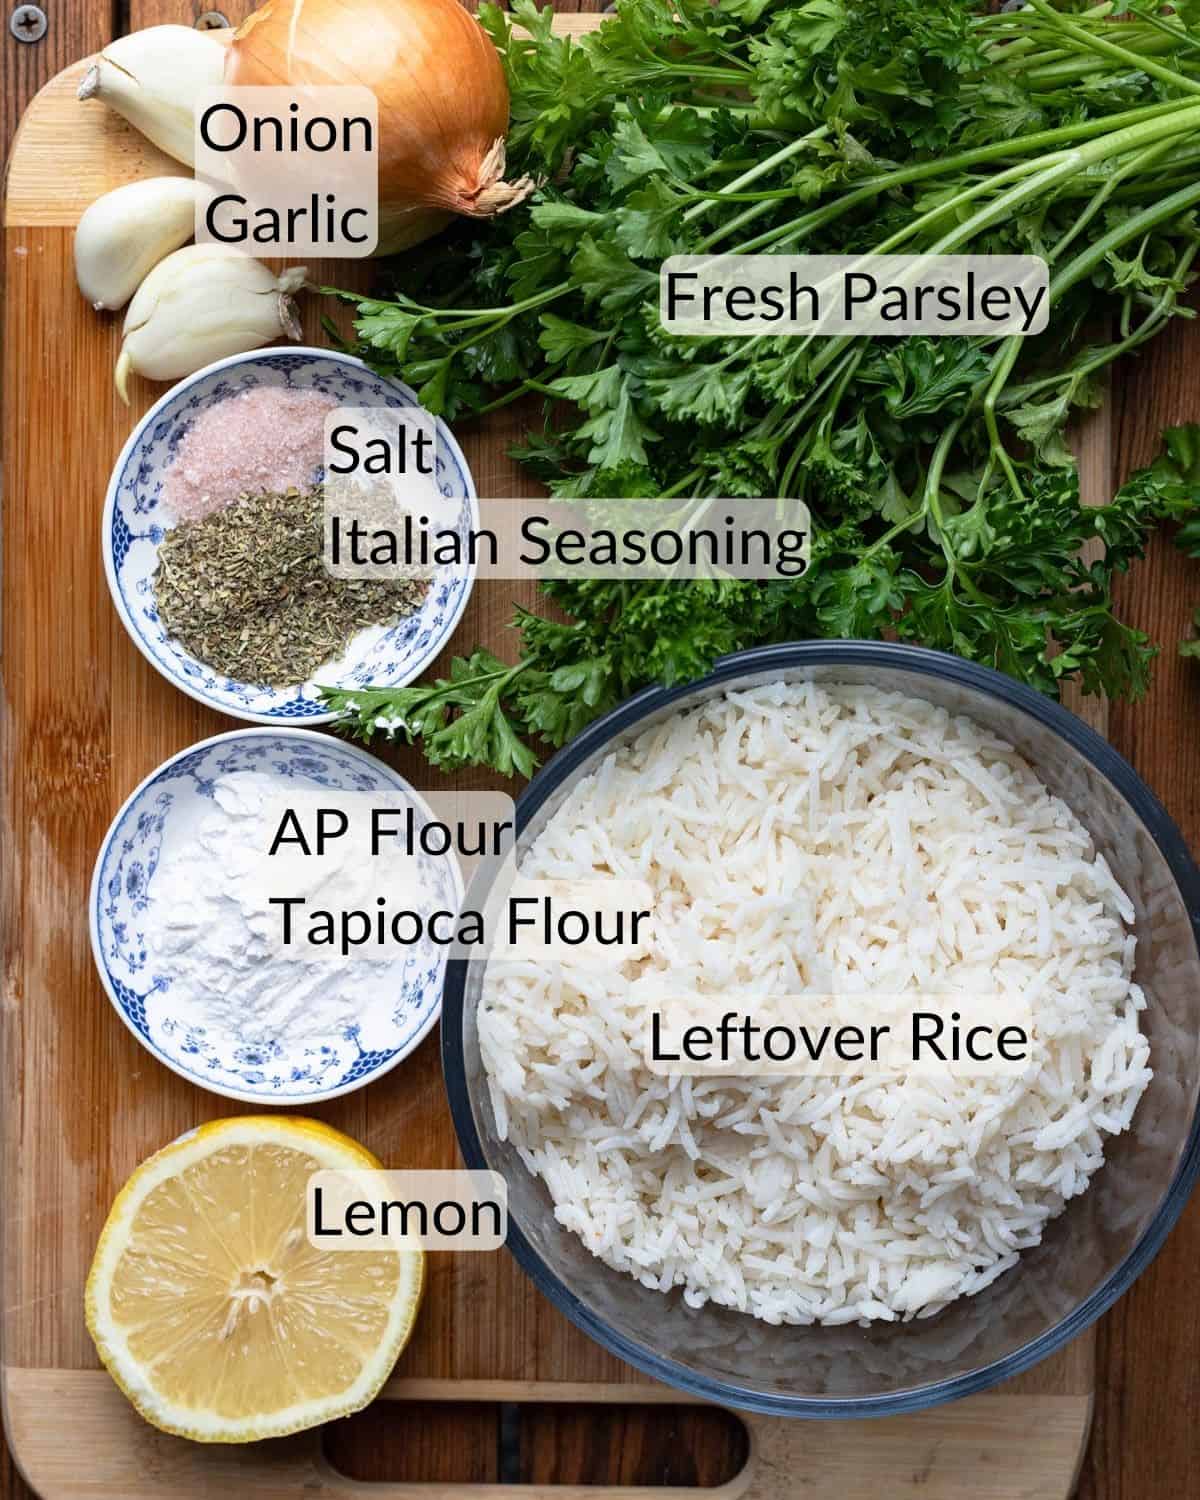 Ingredients needed to make baked rice balls vegan. There is a wooden cutting board with fresh lemon, a bowl of leftover rice, tapioca flour, fresh parsley, fresh onion, fresh garlic, flour, salt and Italian seasoning.